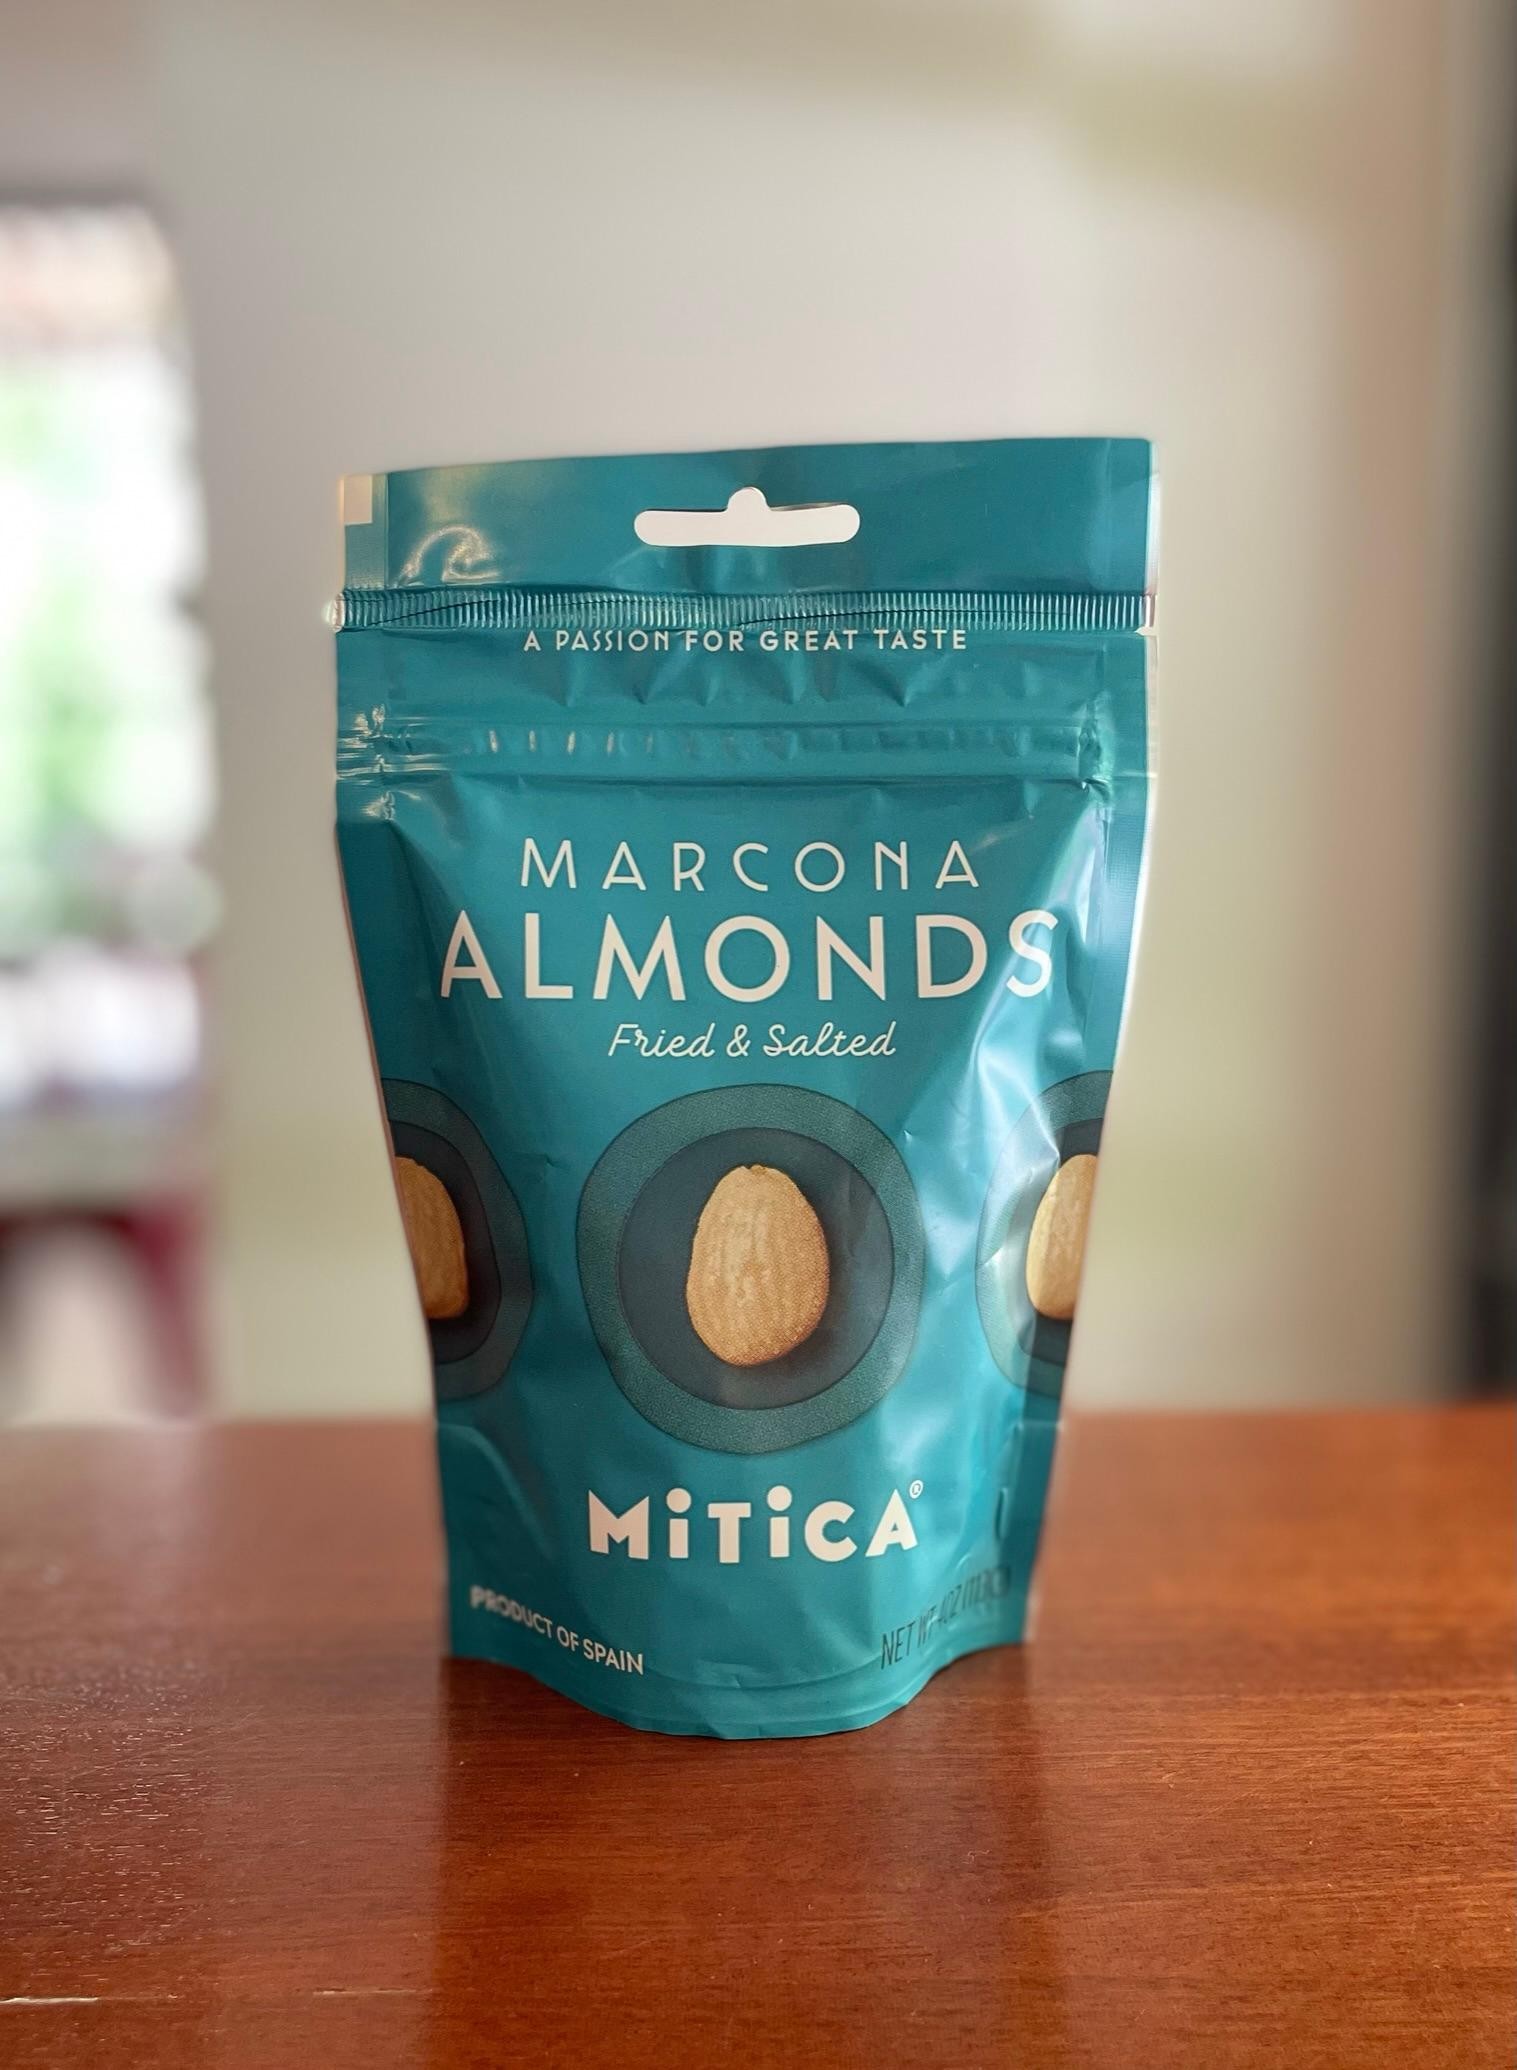 Mitica Fried & Salted Marcona Almonds